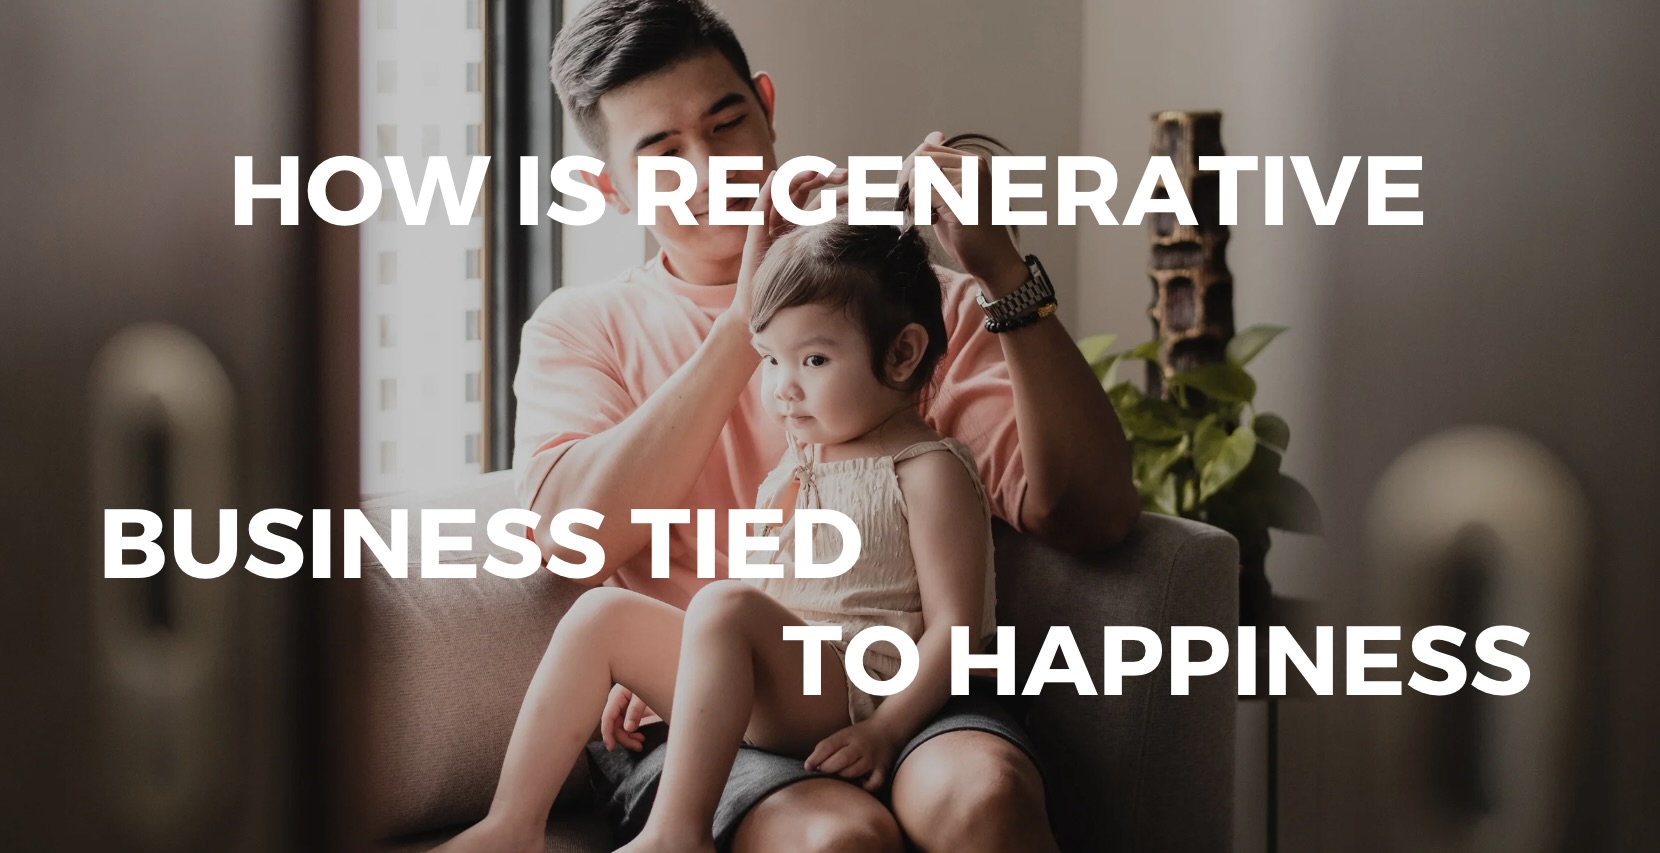 You are currently viewing How is regenerative business tied to the path to happiness?